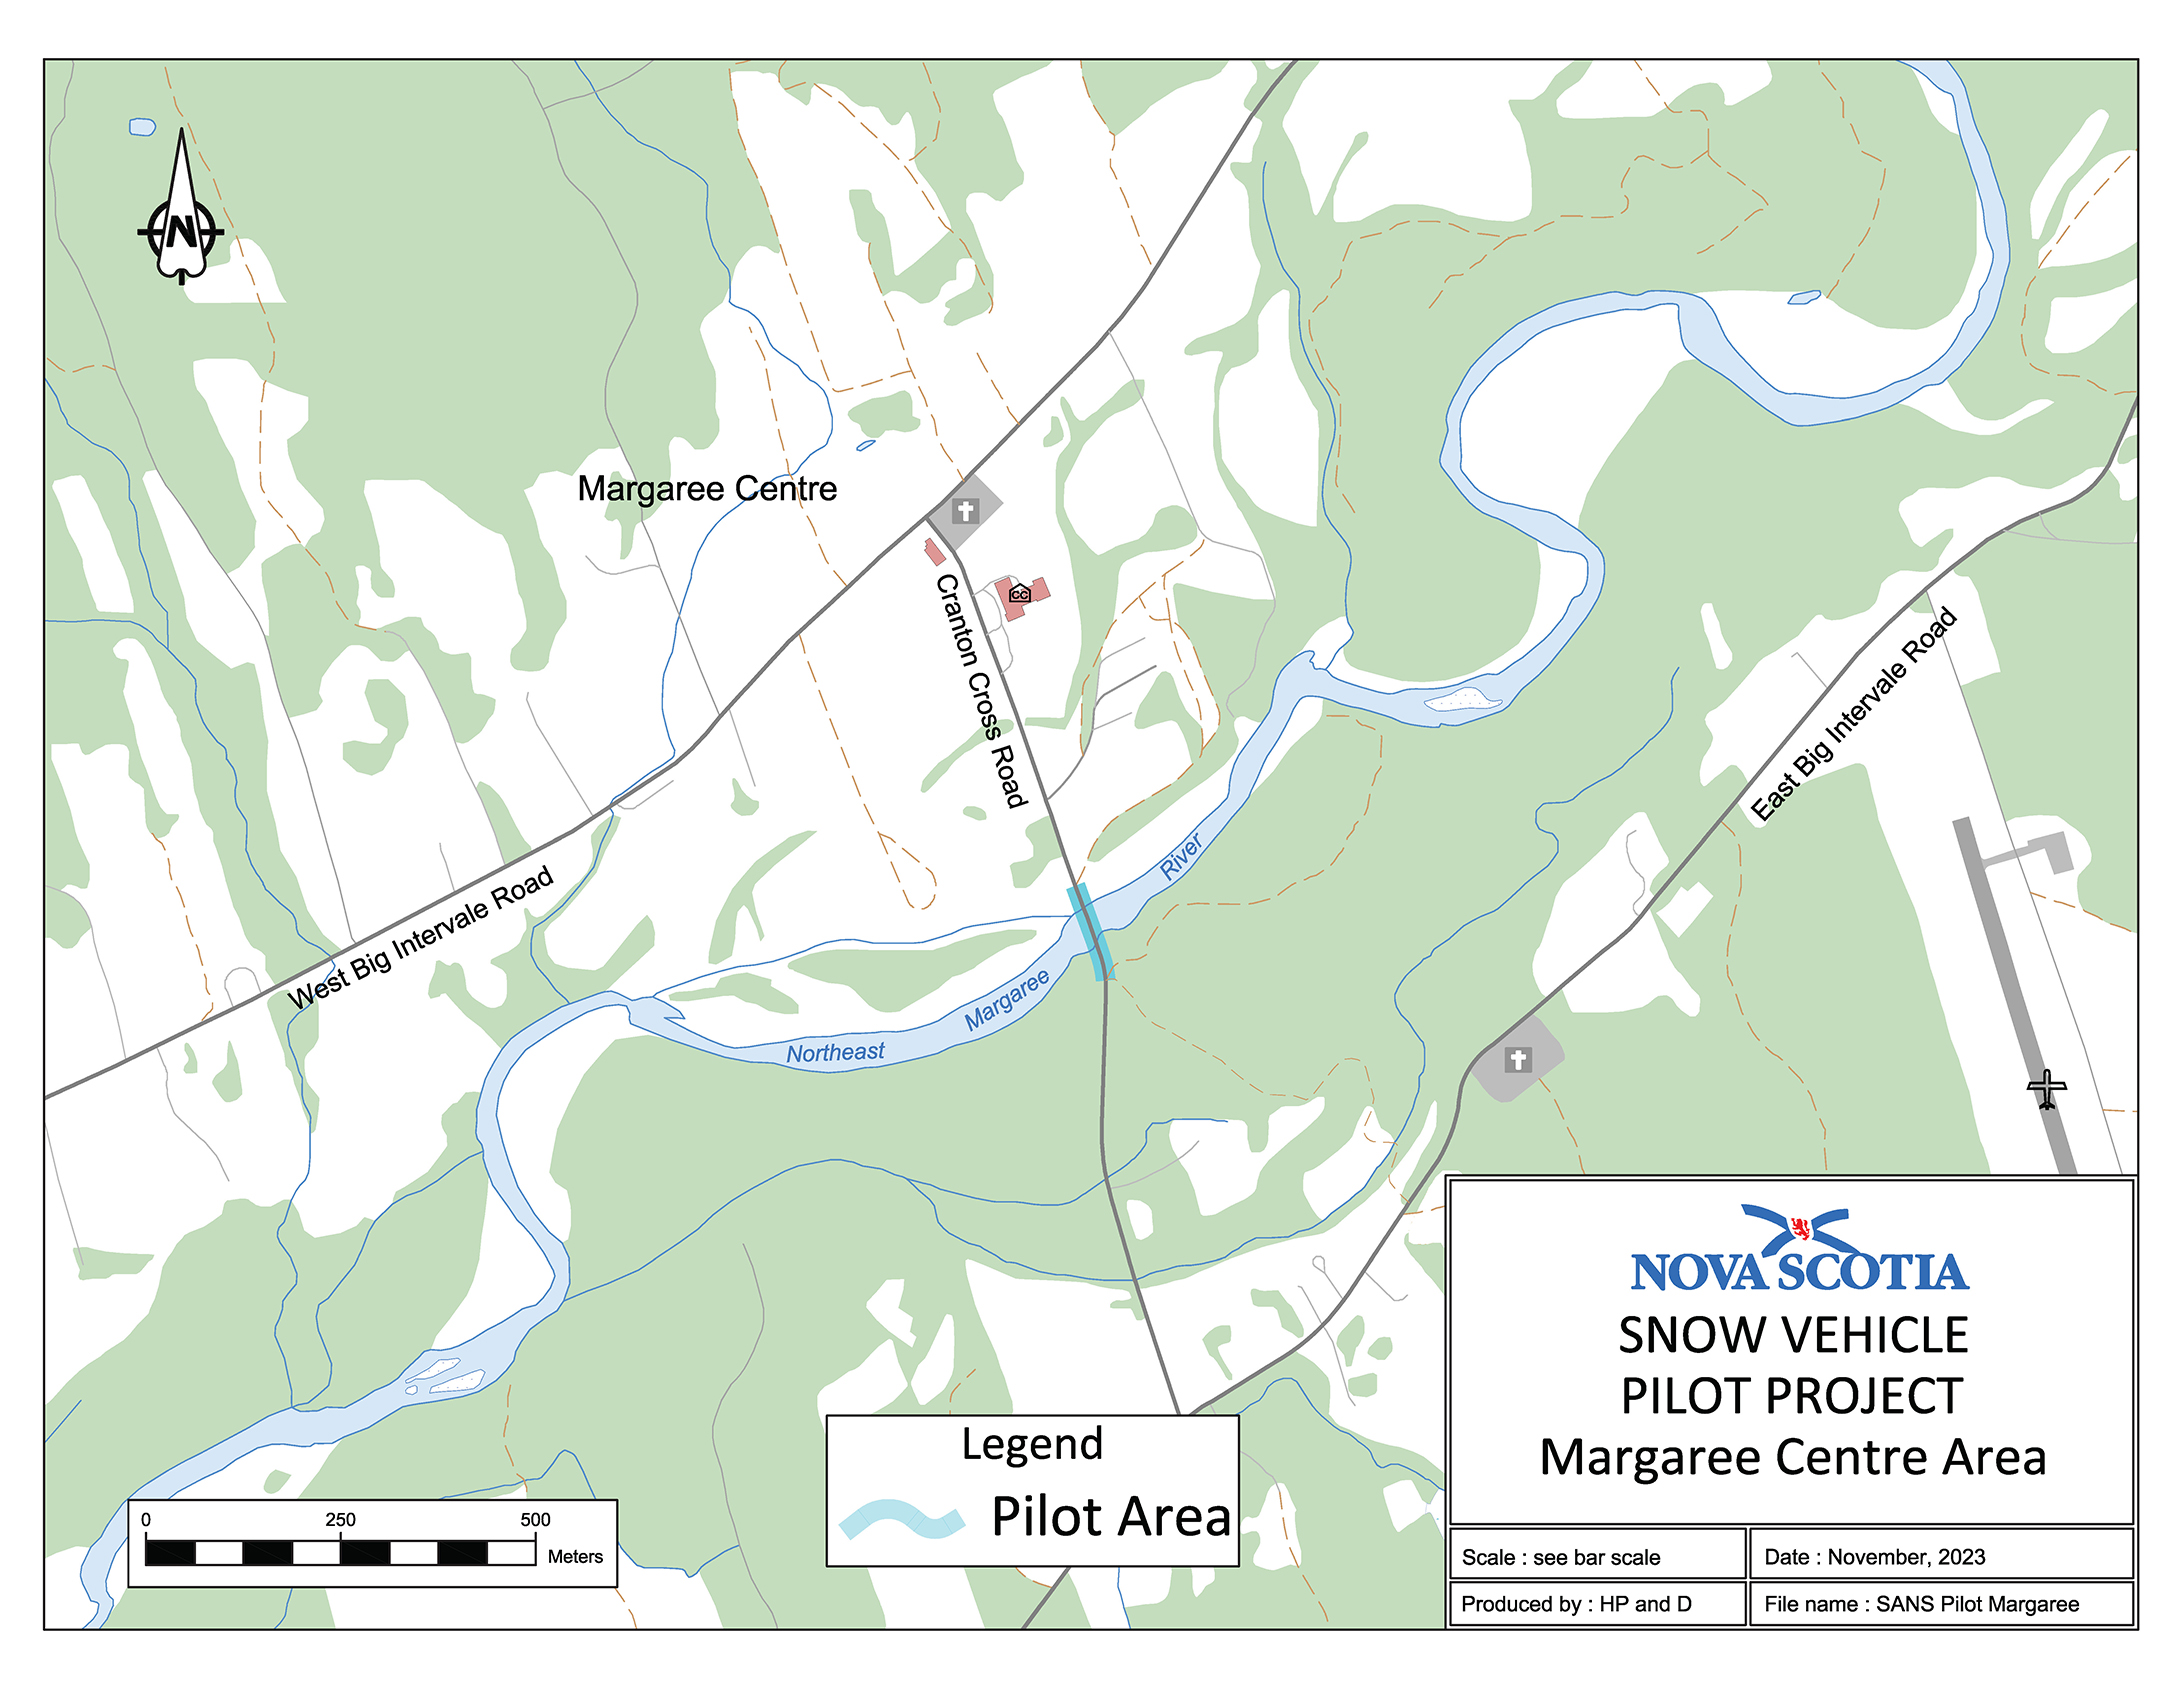 Graphic showing map of the Snow Vehicle Pilot Project Margaree Centre Area